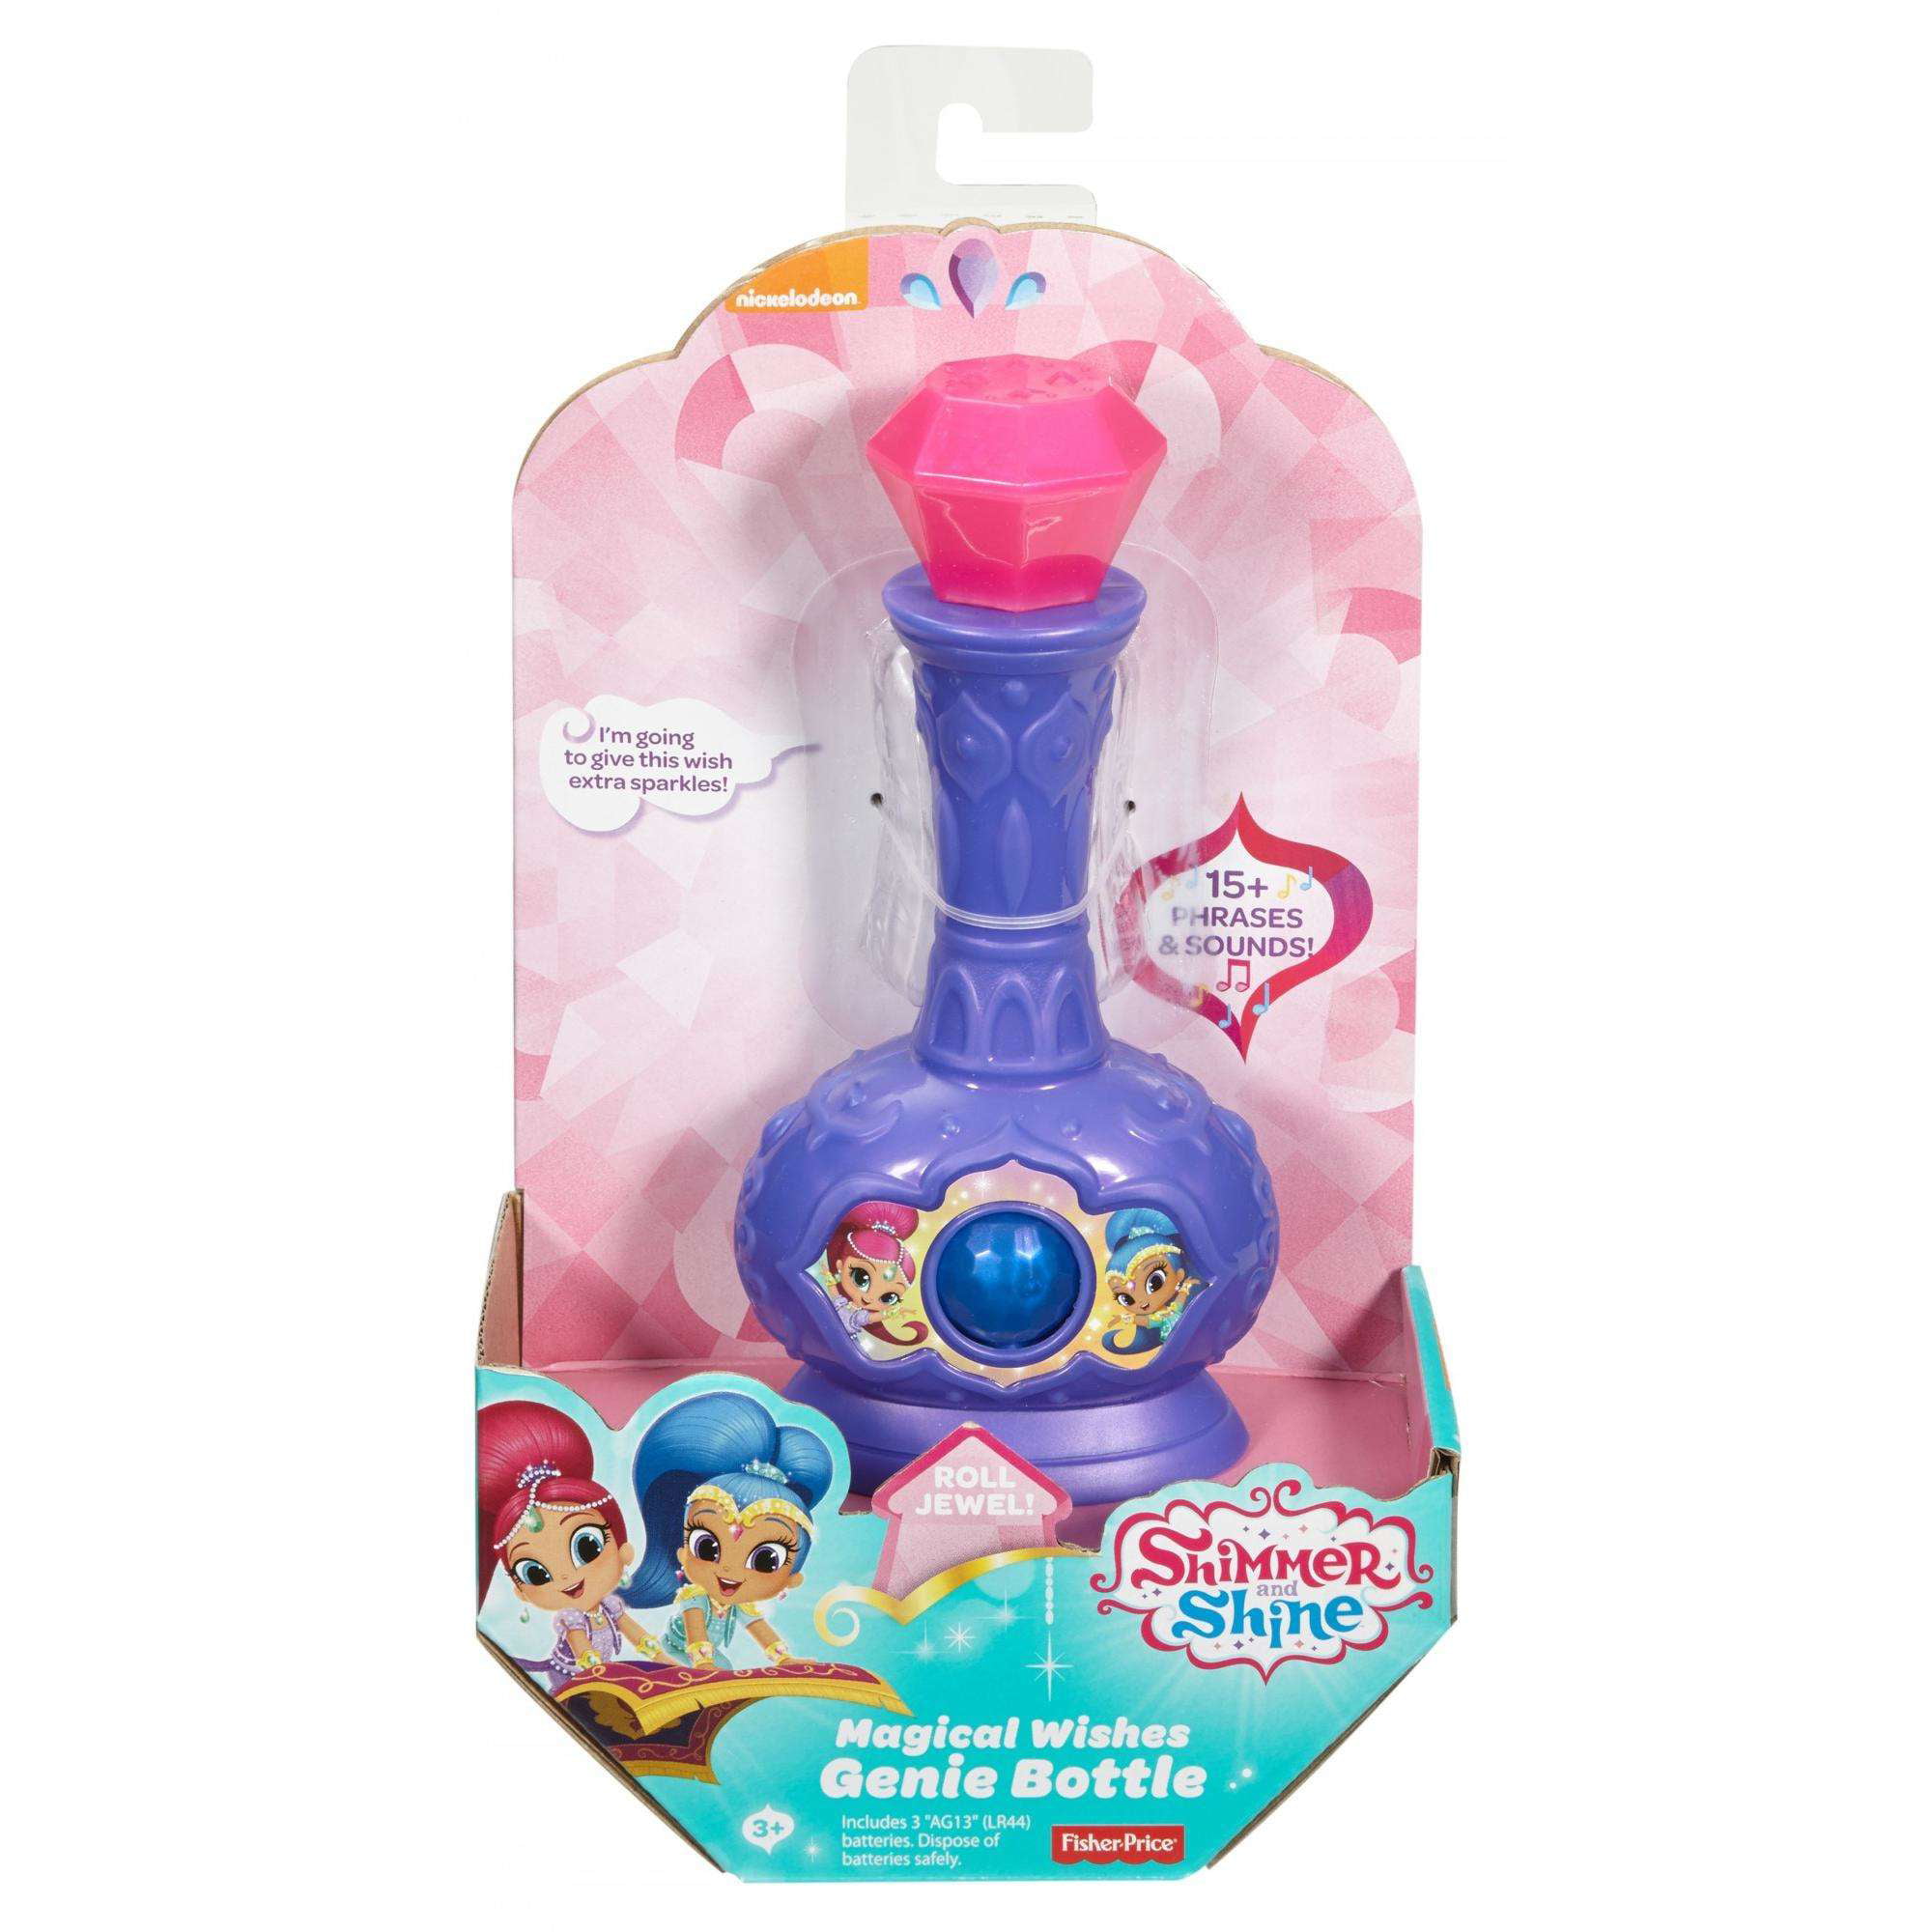 Shimmer and Shine Bath Time Friends Gift Set 2 Squirter Body Wash Jeannie Bottle 